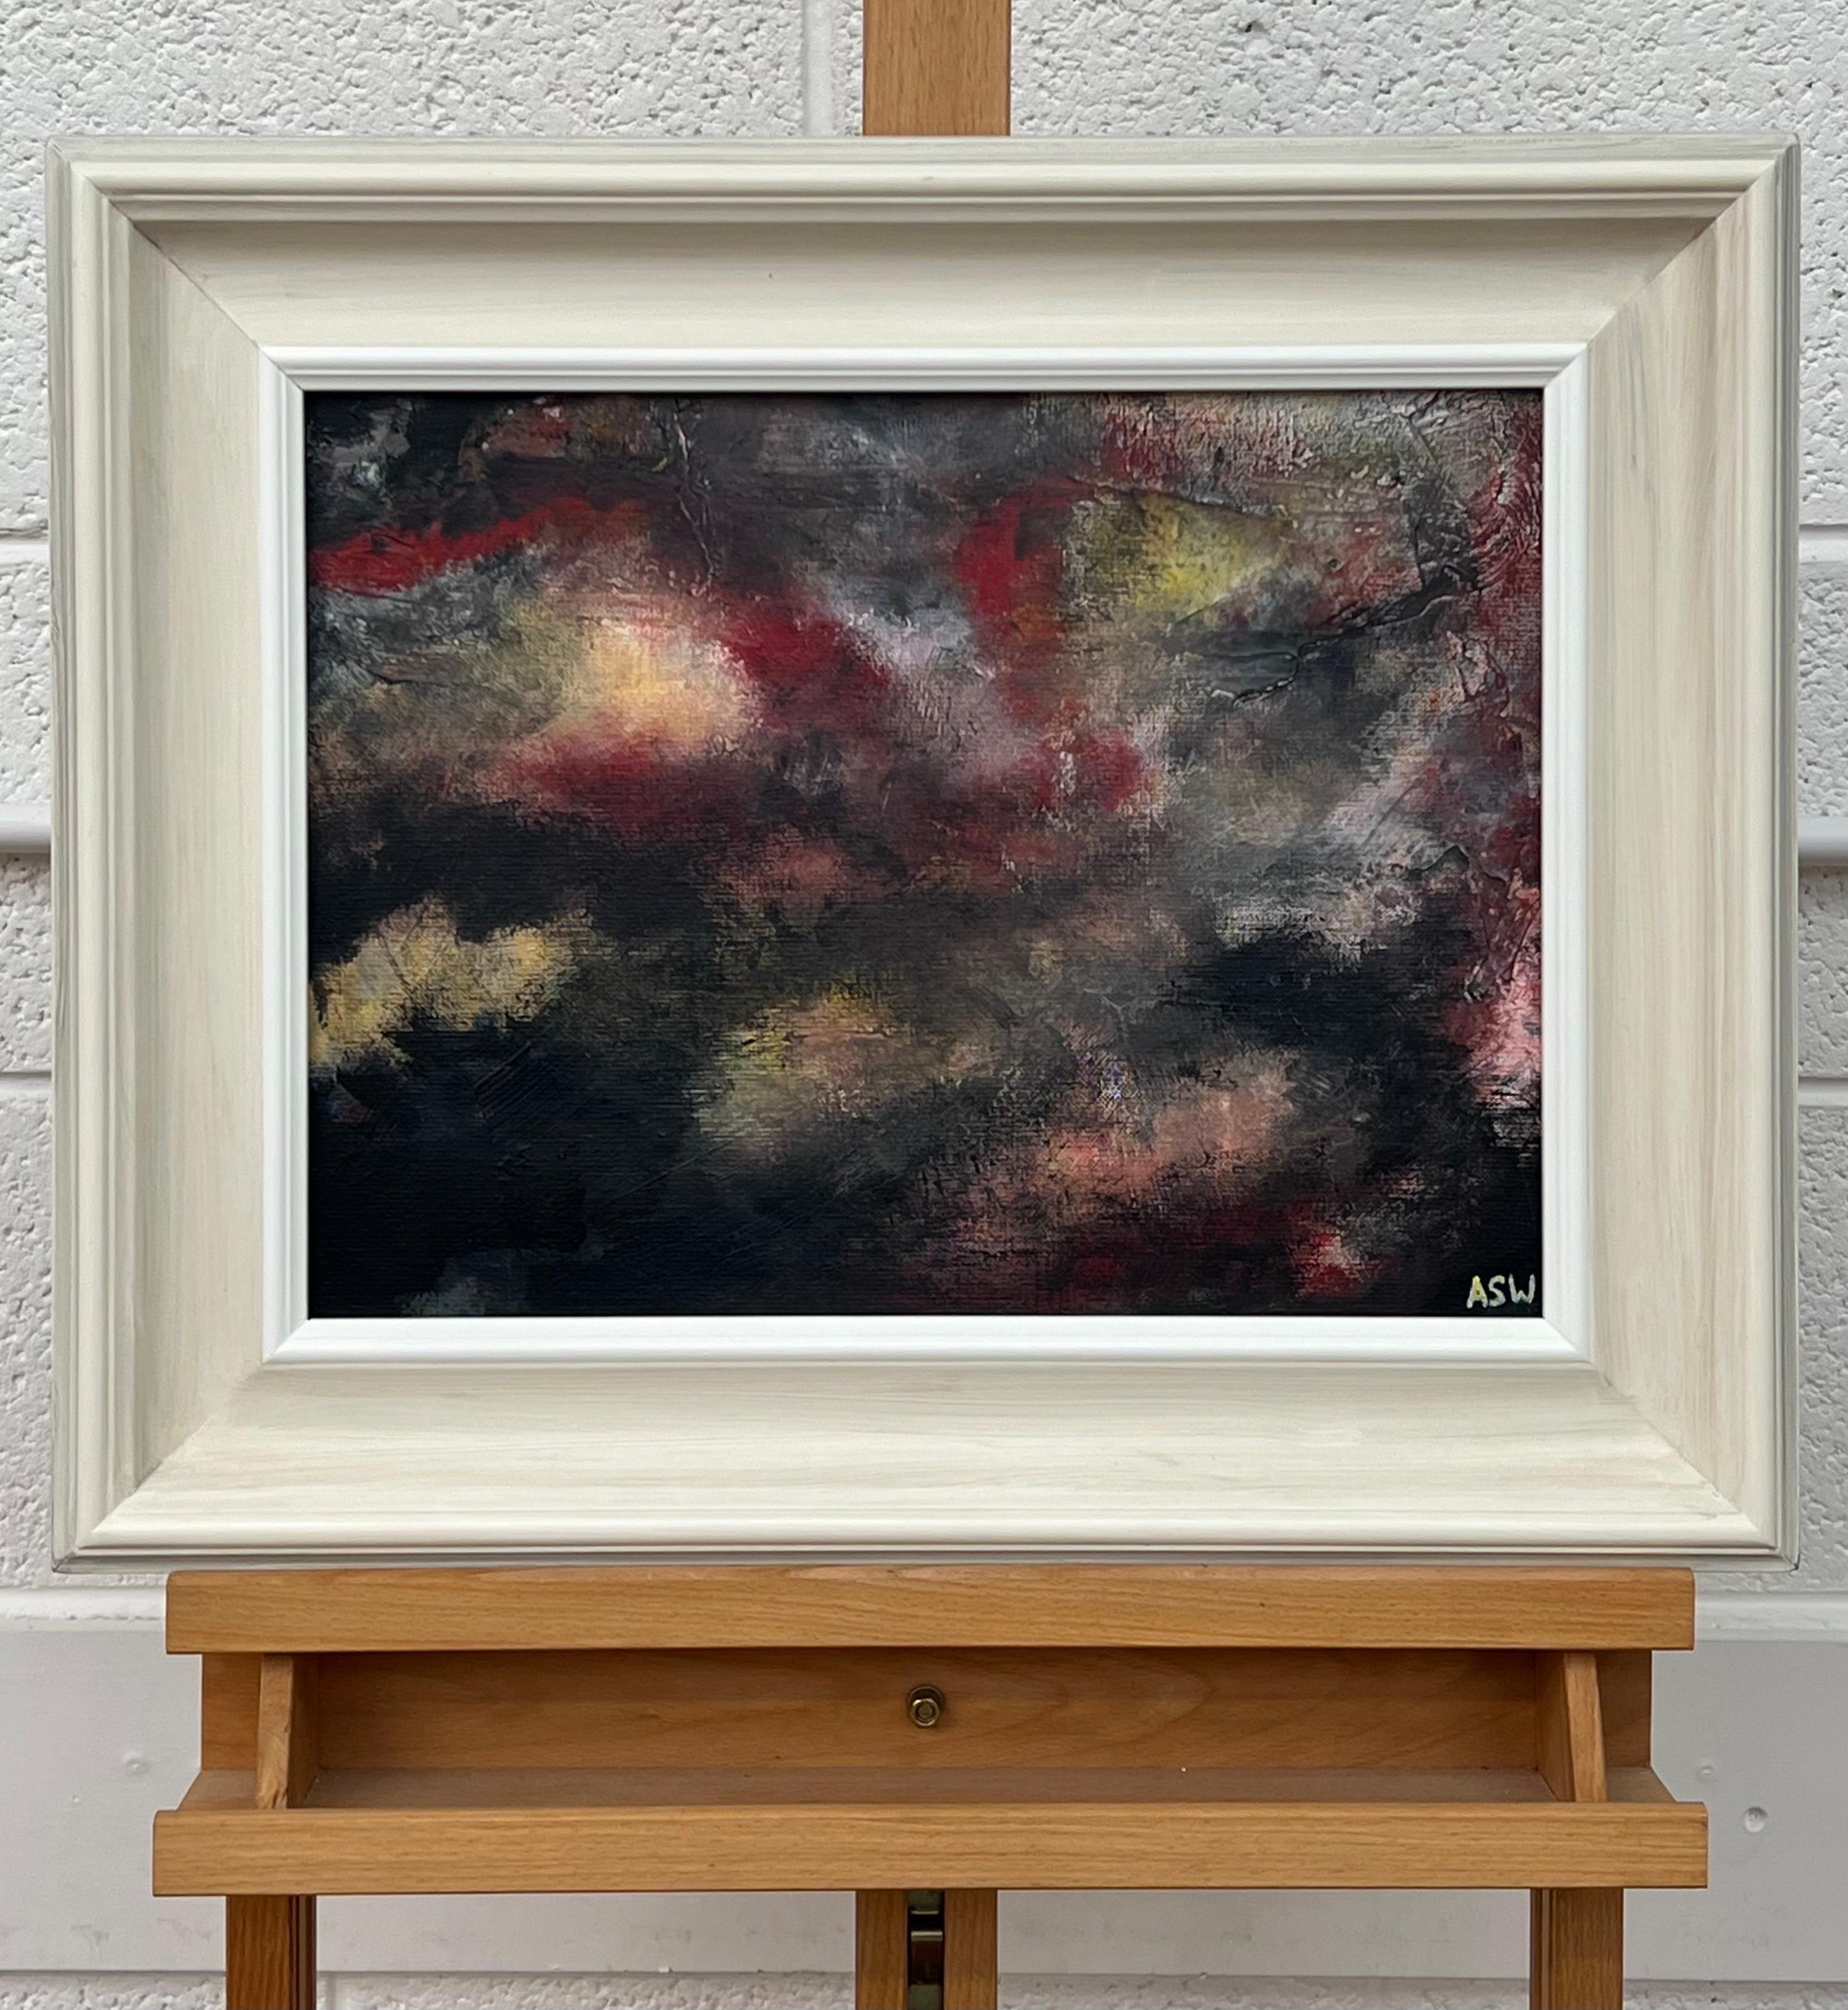 Dark Red & Black Expressive Abstract Painting by Contemporary British Artist, Angela Wakefield. This unique original forms part of a new body of work based on human emotions, and explores the boundaries between landscape, skyscape, cloudscape and